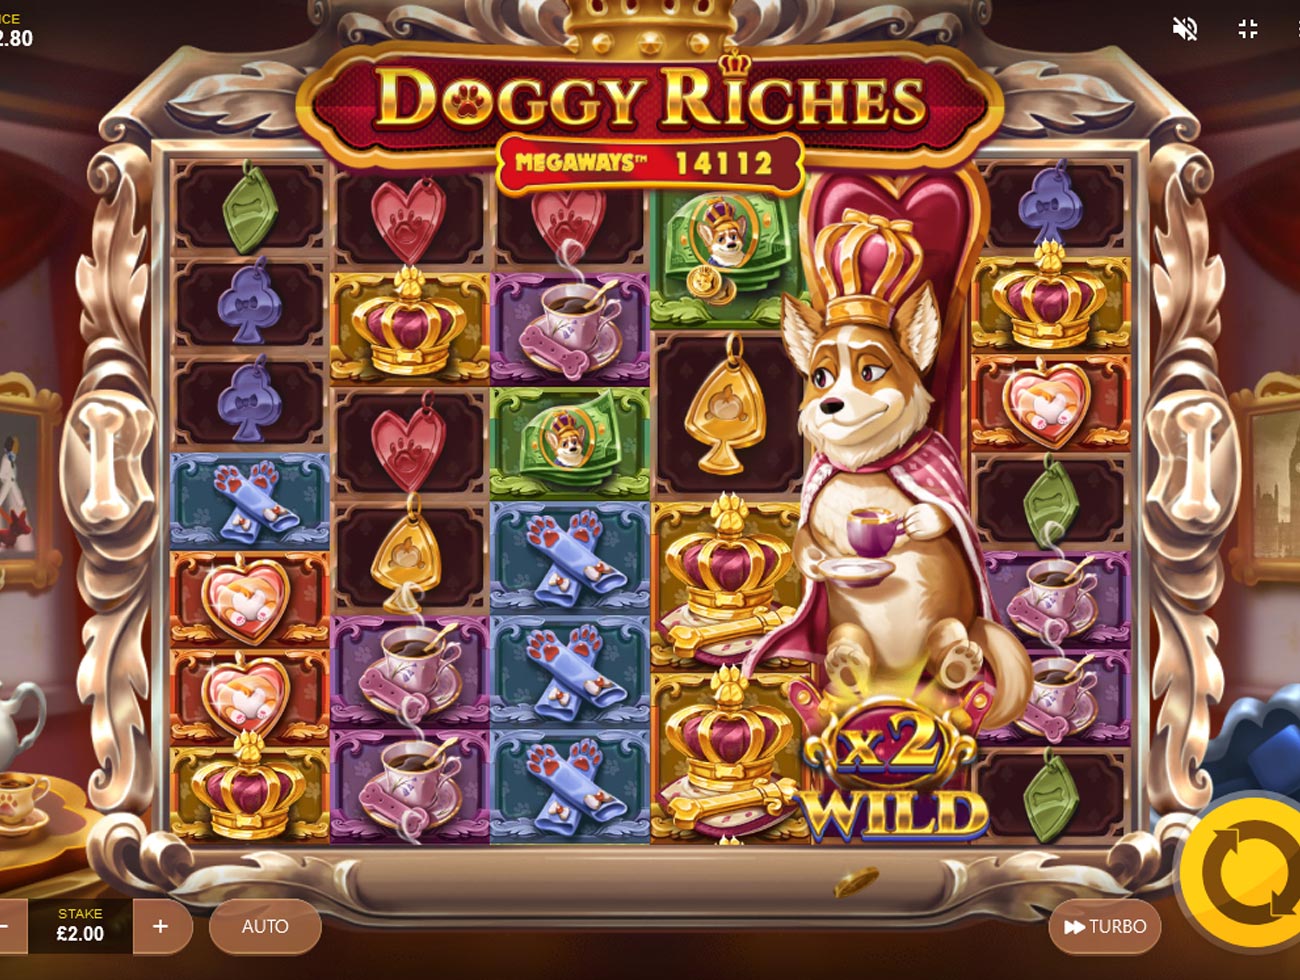 Doggy Riches Megaways Wilds